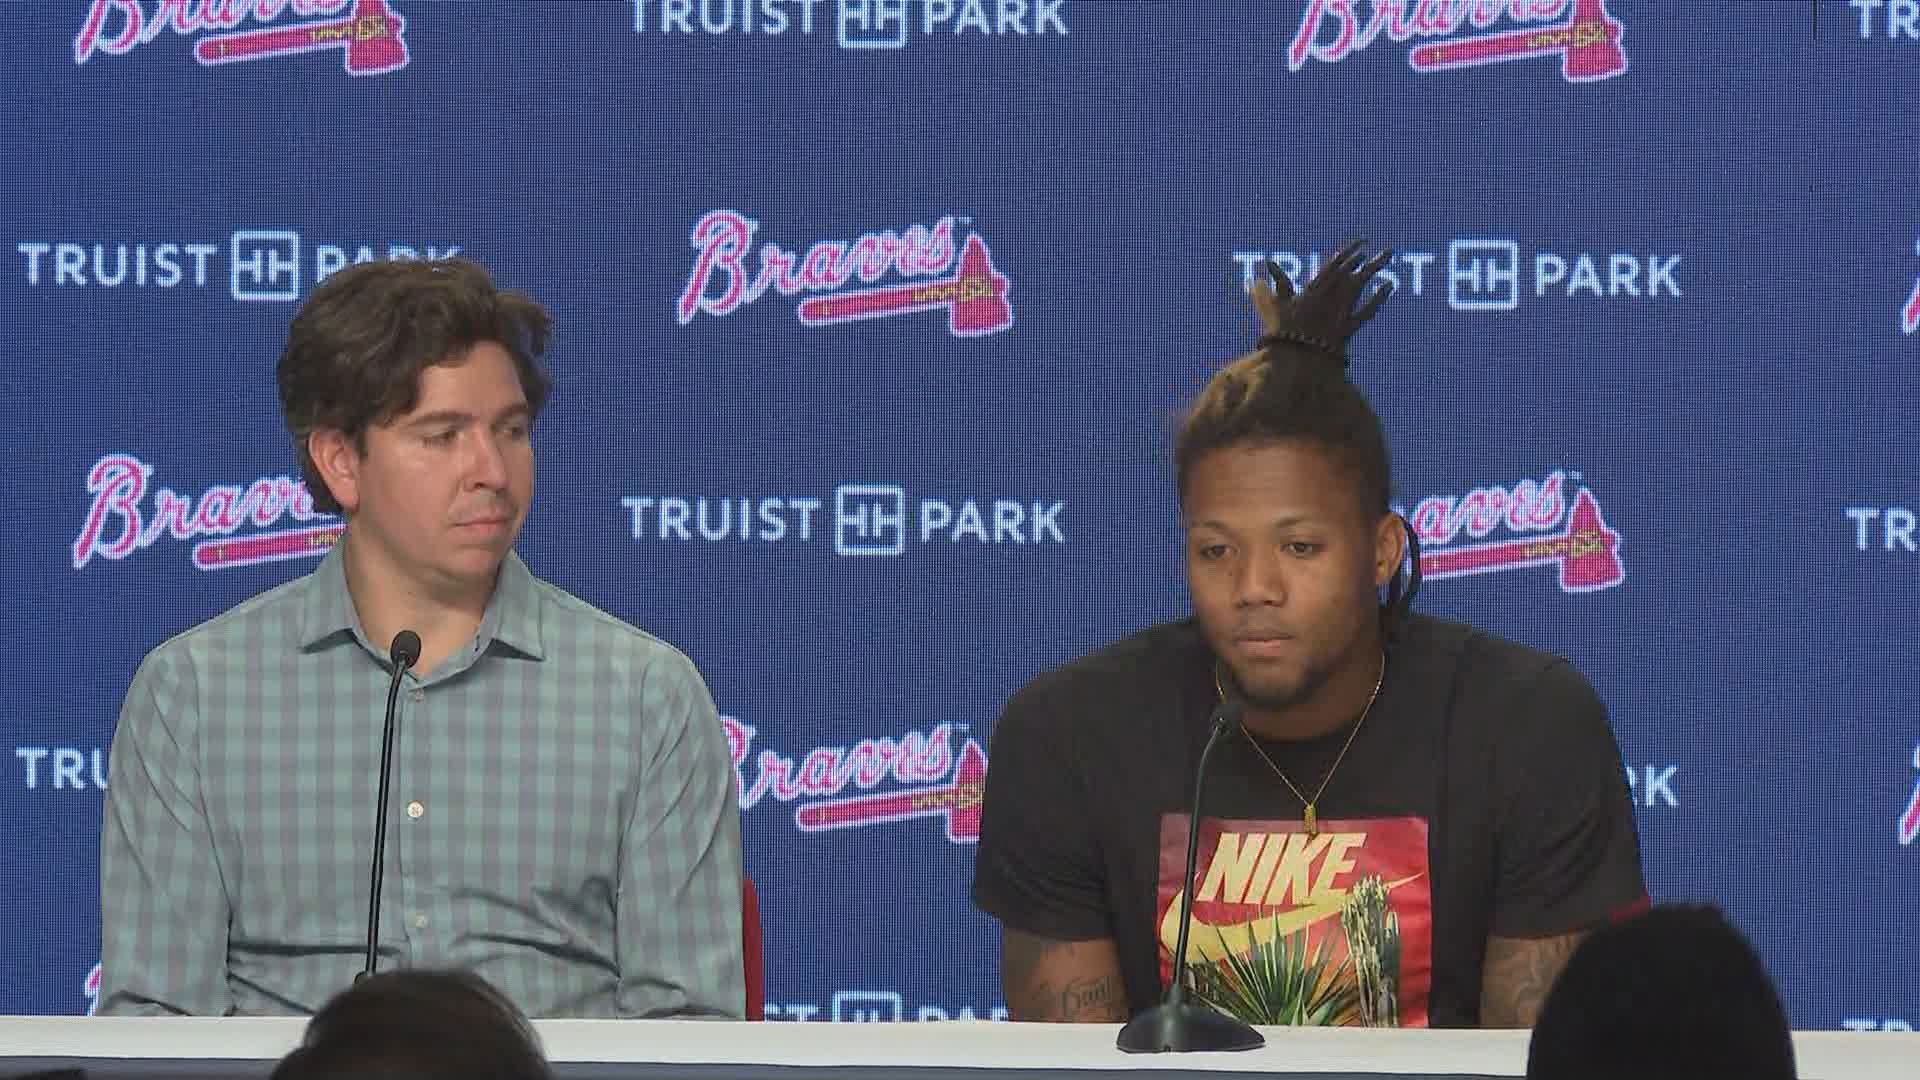 Acuña Jr. remained hopeful for the Braves' chance to still win a World Series this year, as they did so without him in 2021.